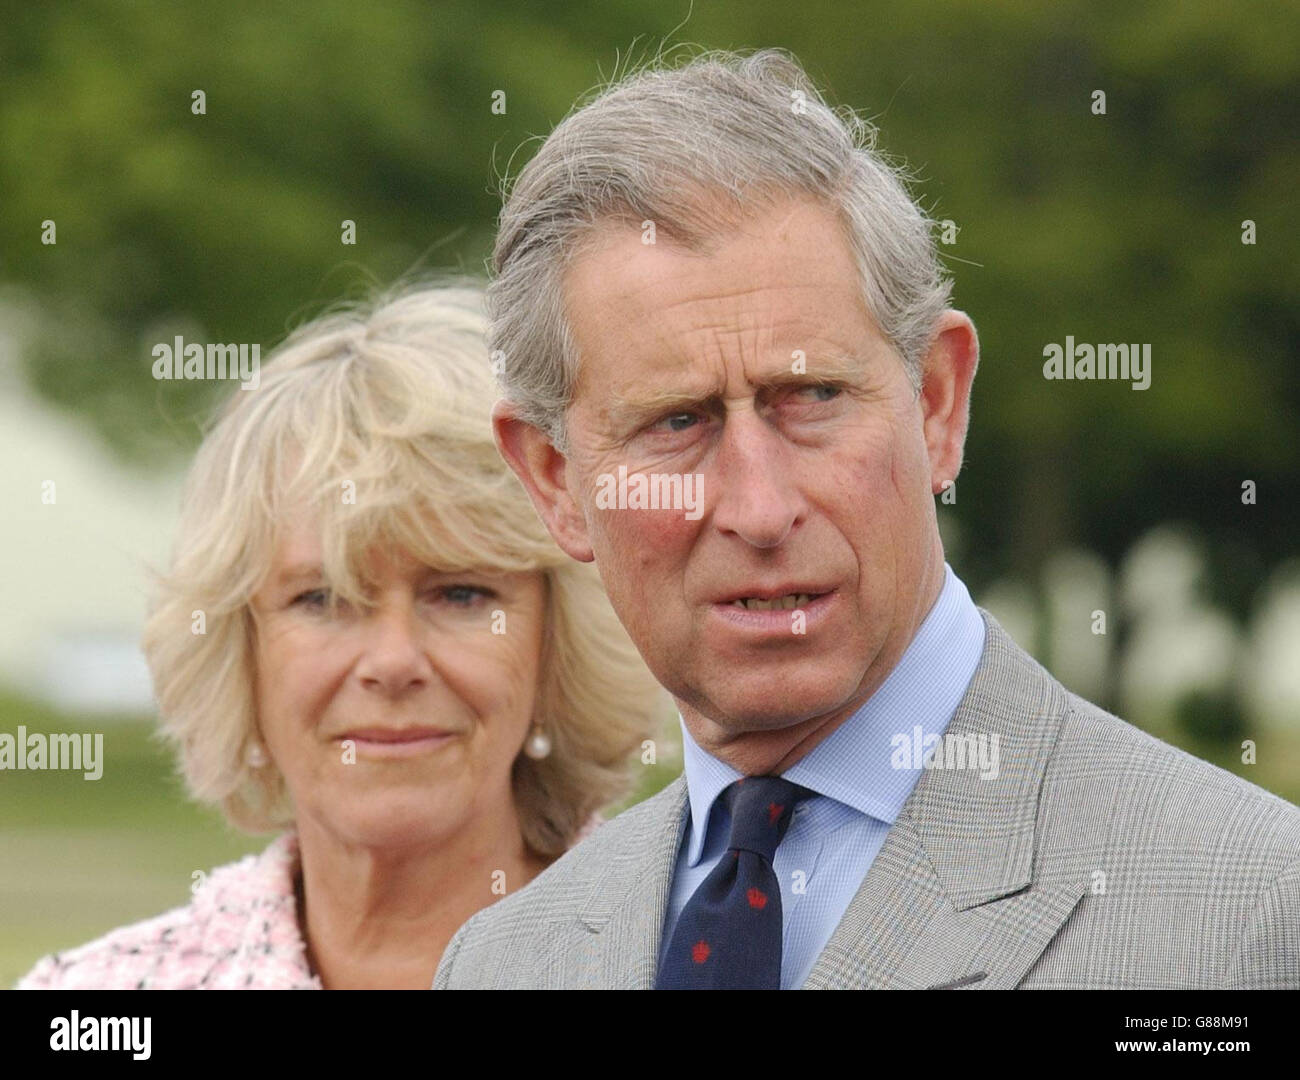 The Prince of Wales and Duchess of Cornwall during their visit to Kemble Airfield in Gloucestershire. A former RAF /UASF base dating back to 1936, it has now made the transition to a busy civilian airfield. Stock Photo